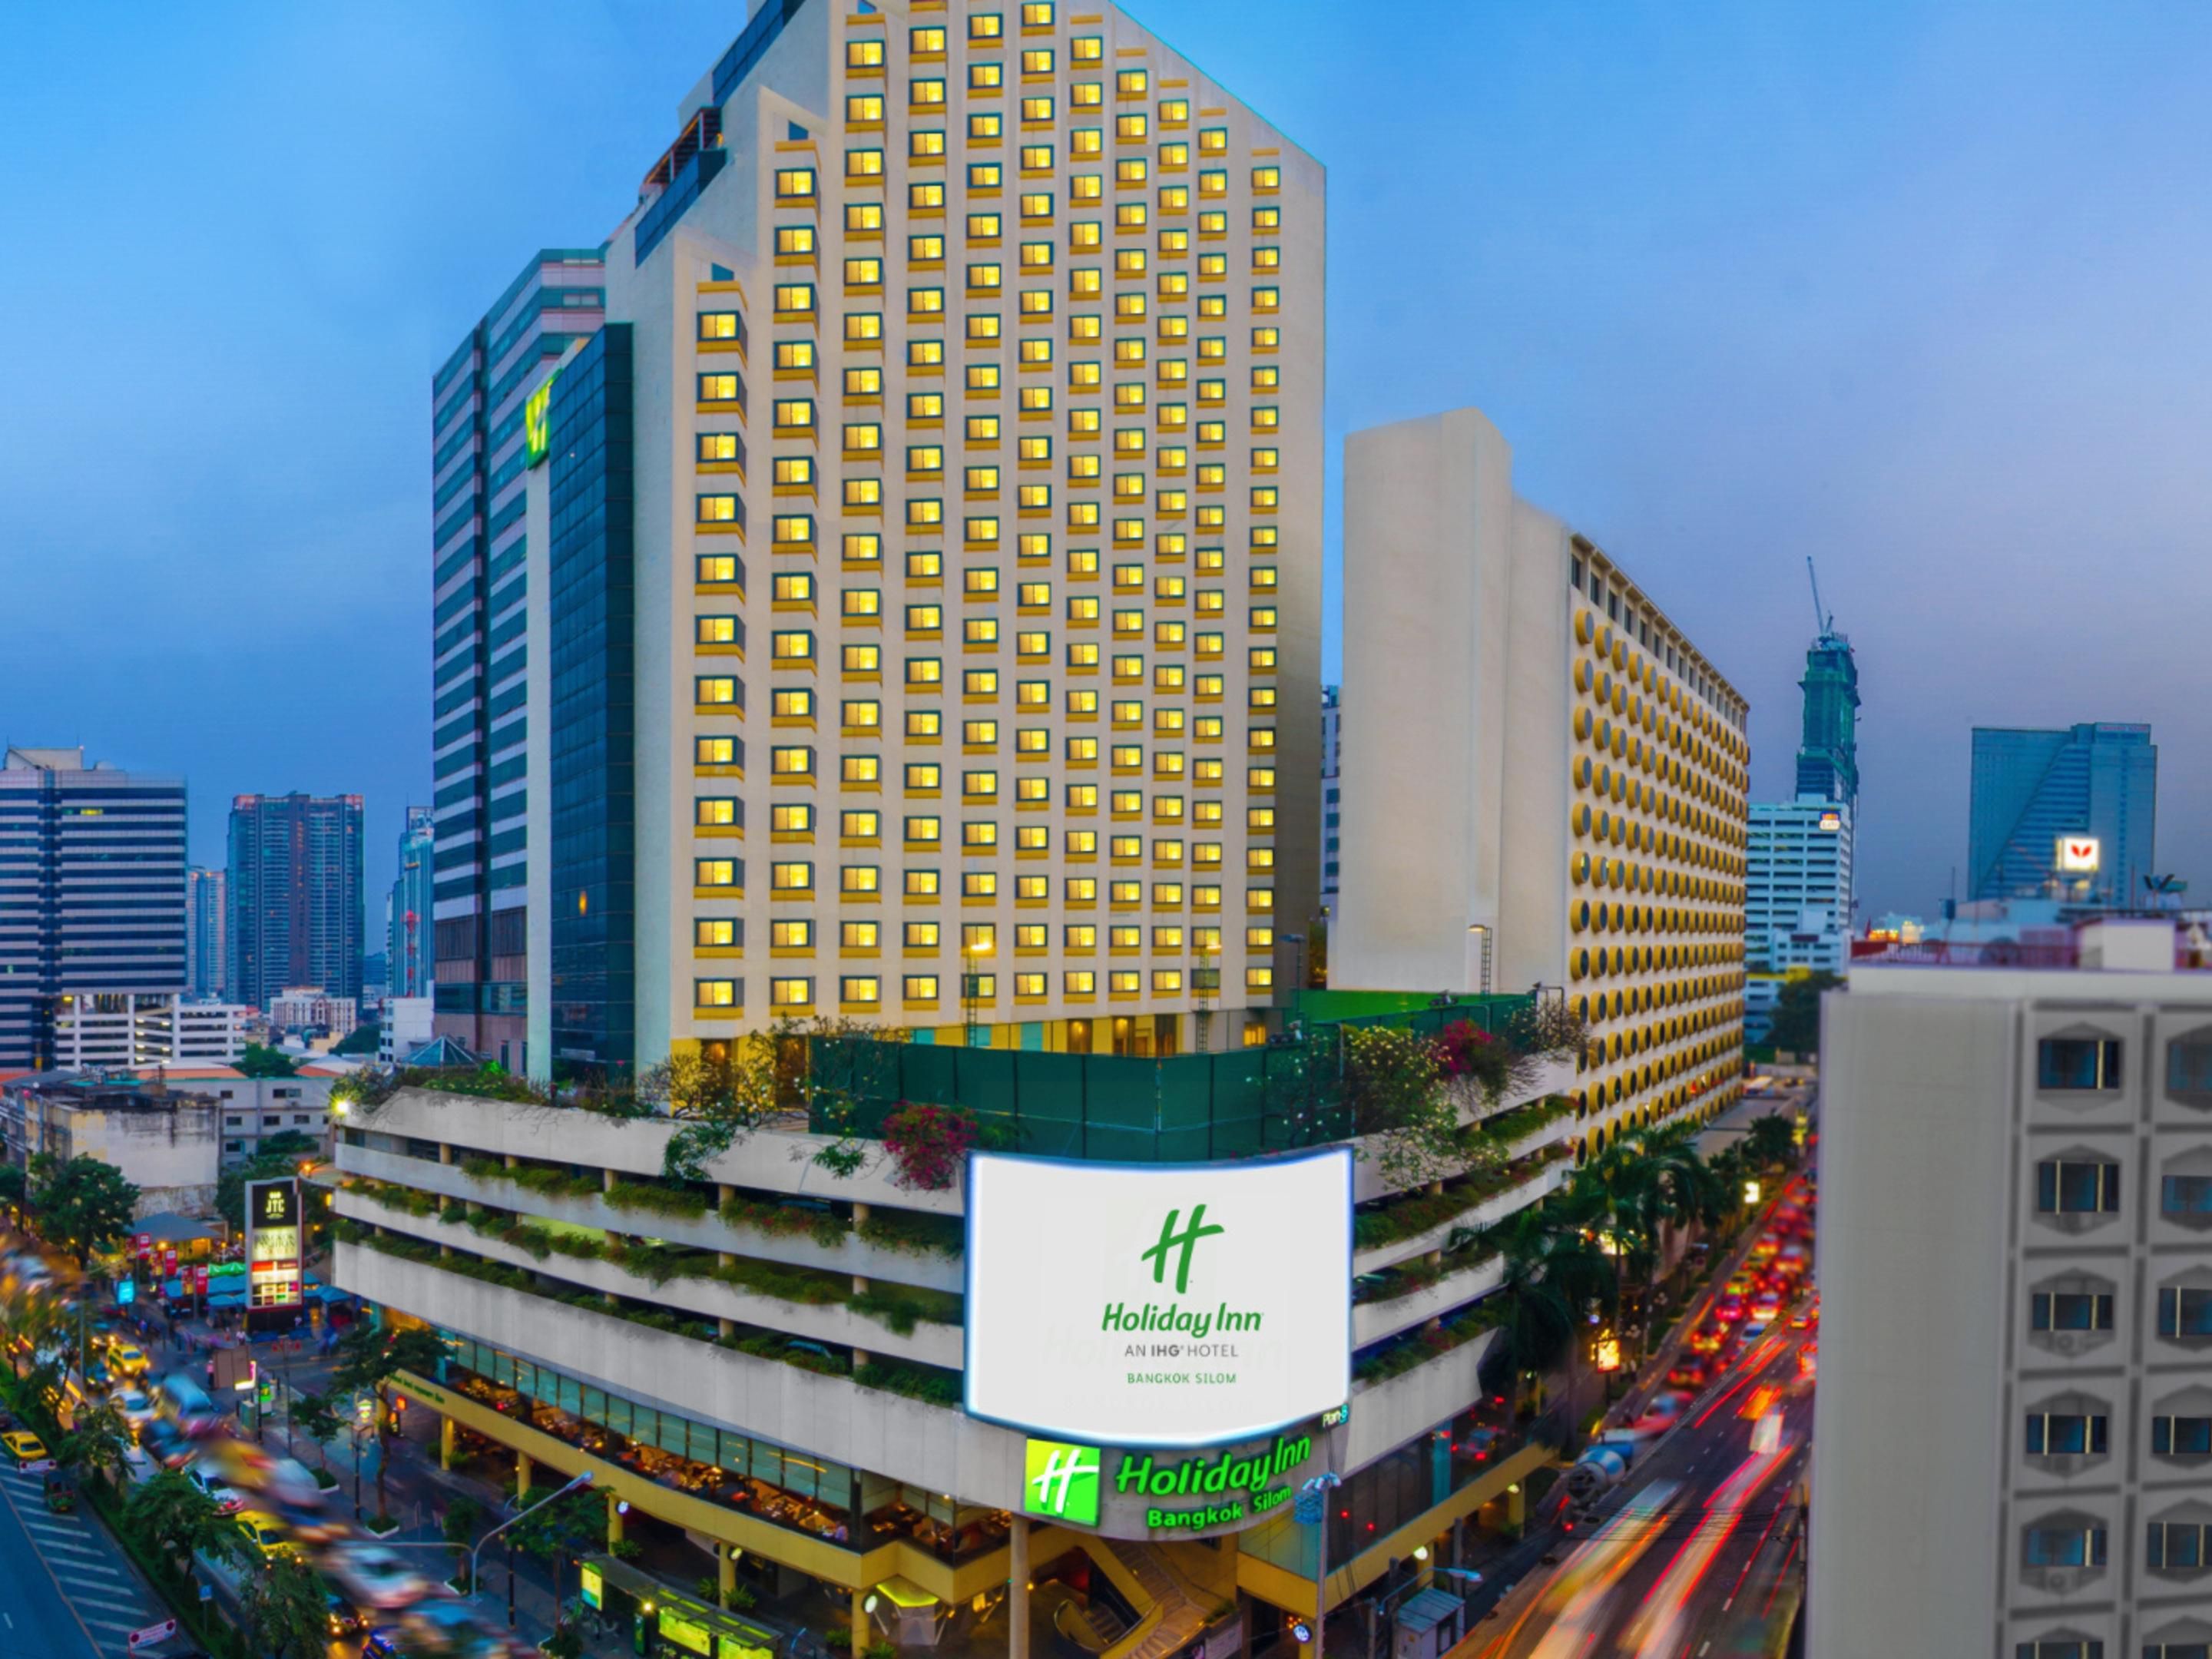 Situated just a seven-minute walk from Surasak Skytrain Station, our Silom hotel offers seamless connectivity in Bangkok. With easy access to two expressways leading to Suvarnabhumi International Airport and Don Muang Airport, our strategic location allows you to make the most of your stay with effortless travel and easy exploration.